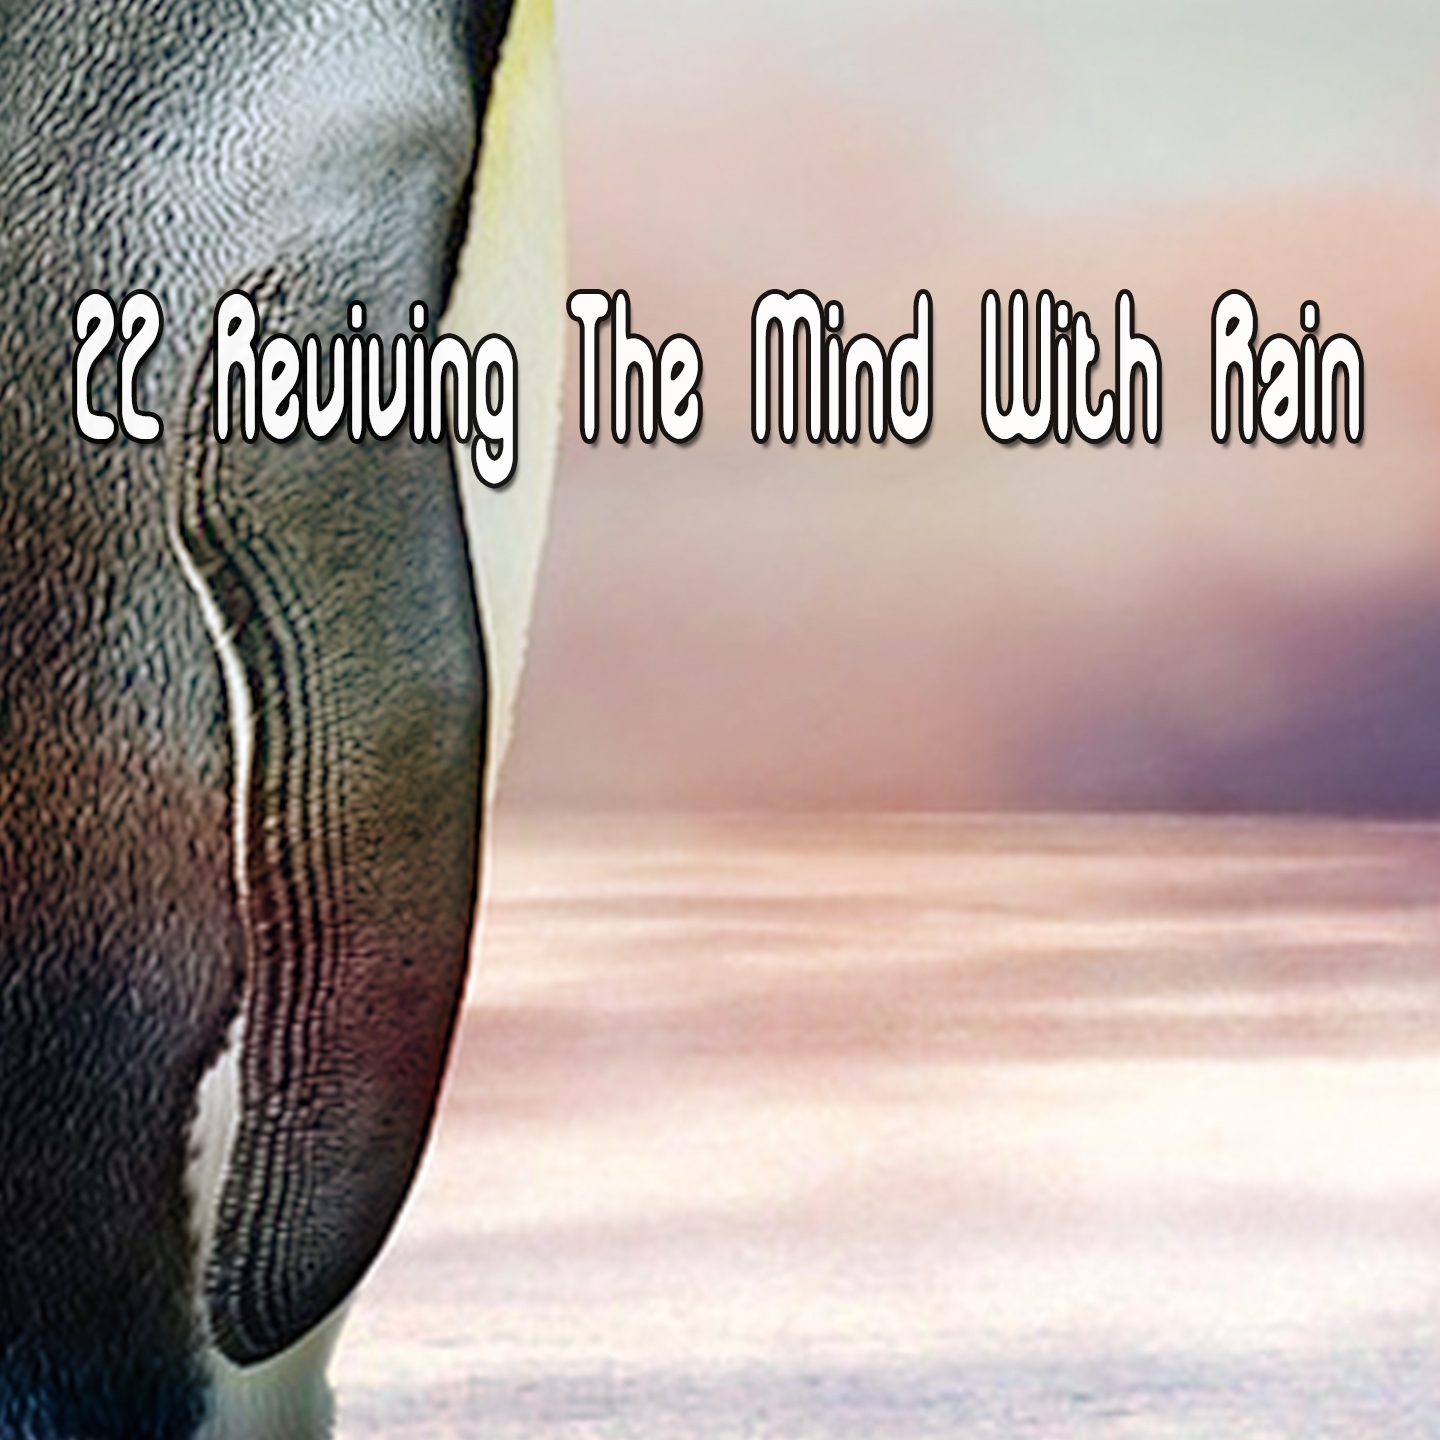 22 Reviving The Mind With Rain